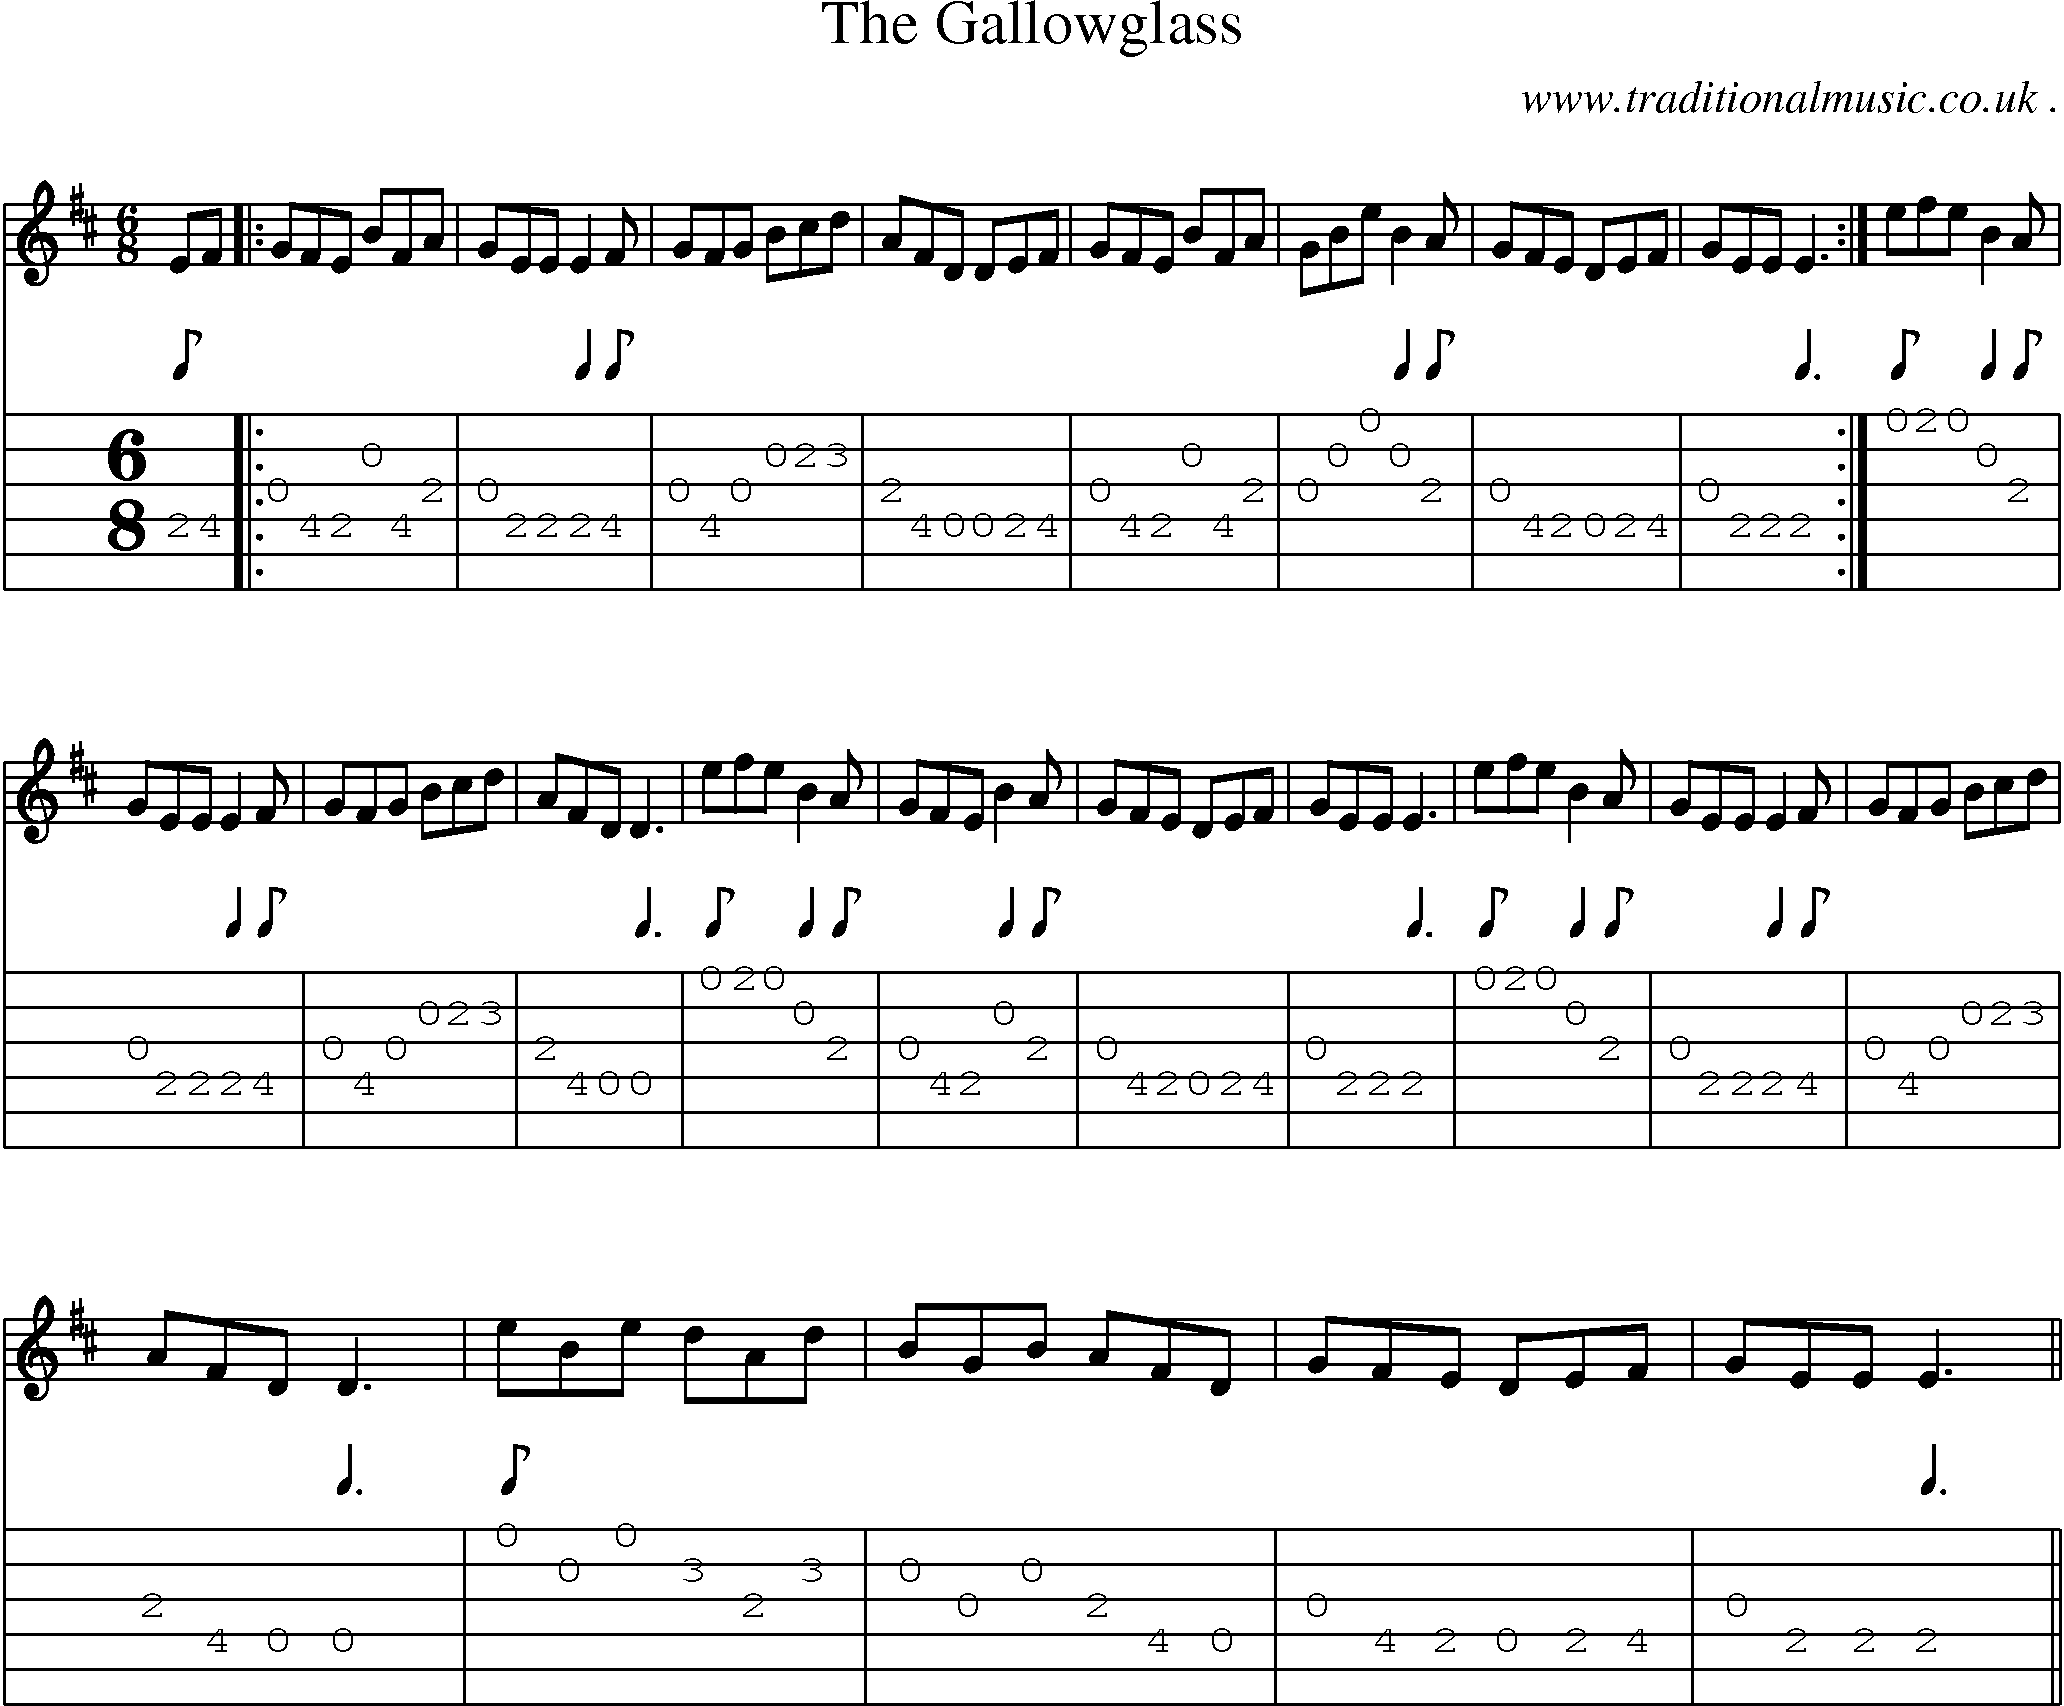 Sheet-Music and Guitar Tabs for The Gallowglass